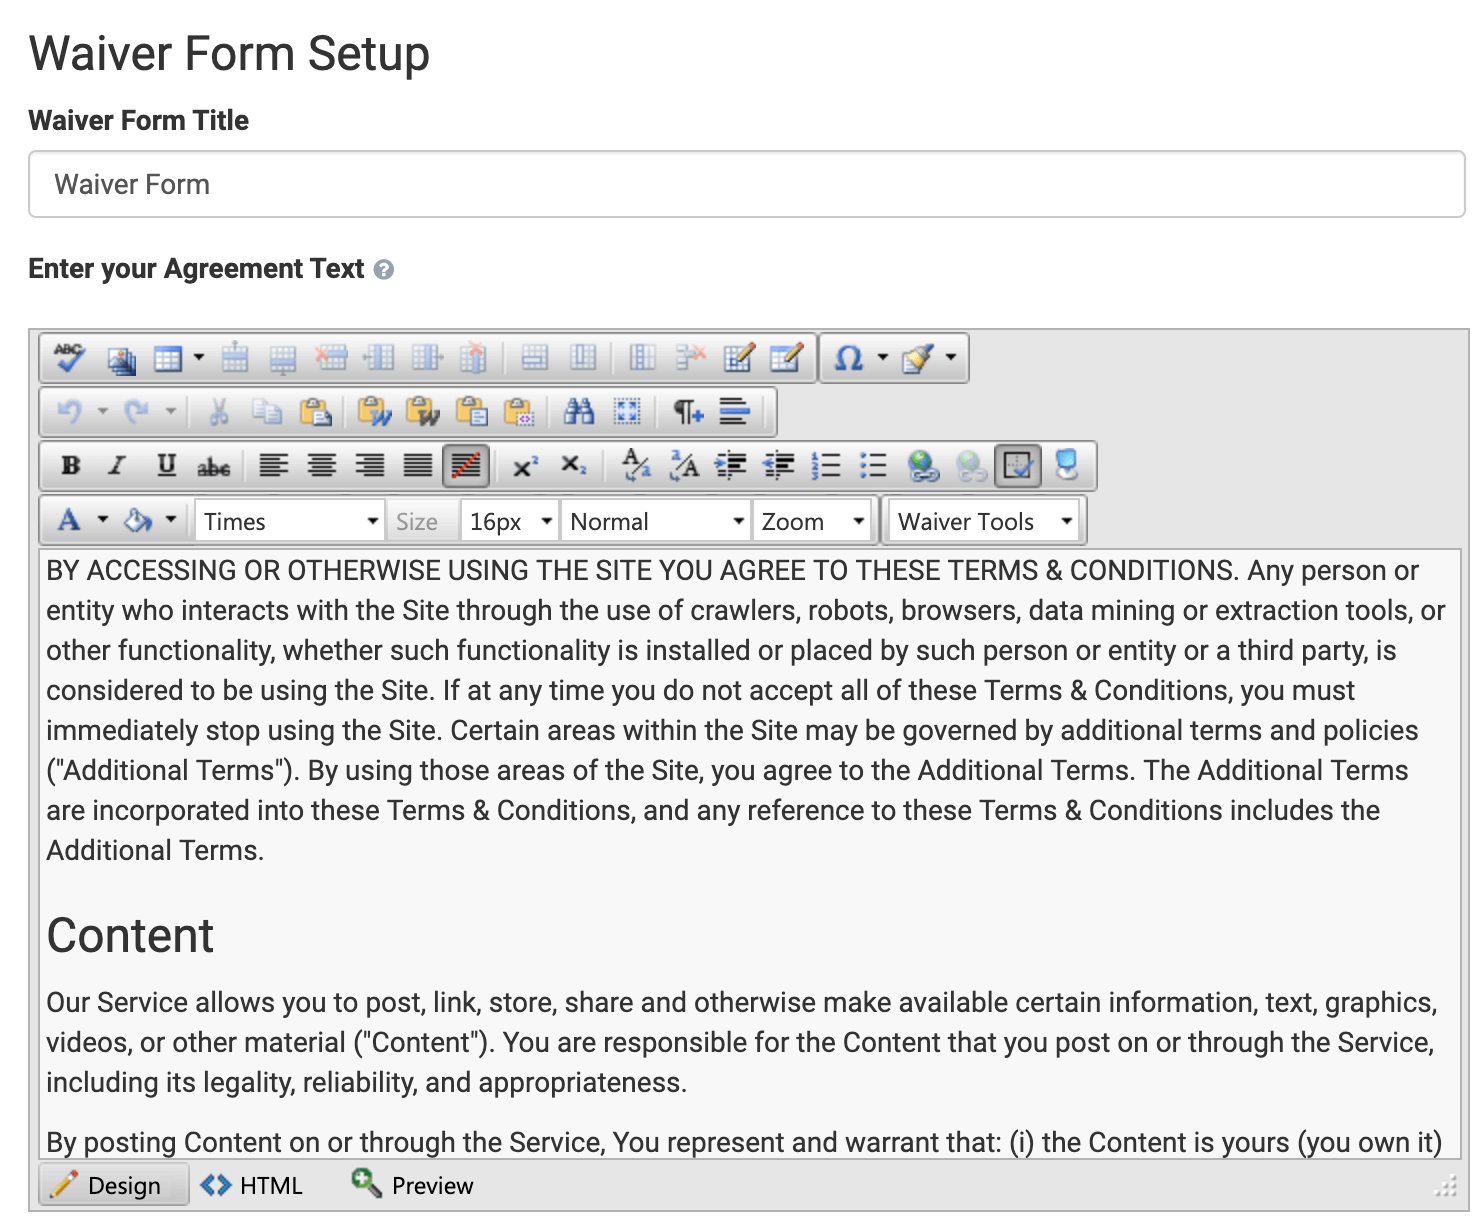 Setup waiver form with the rich text editor